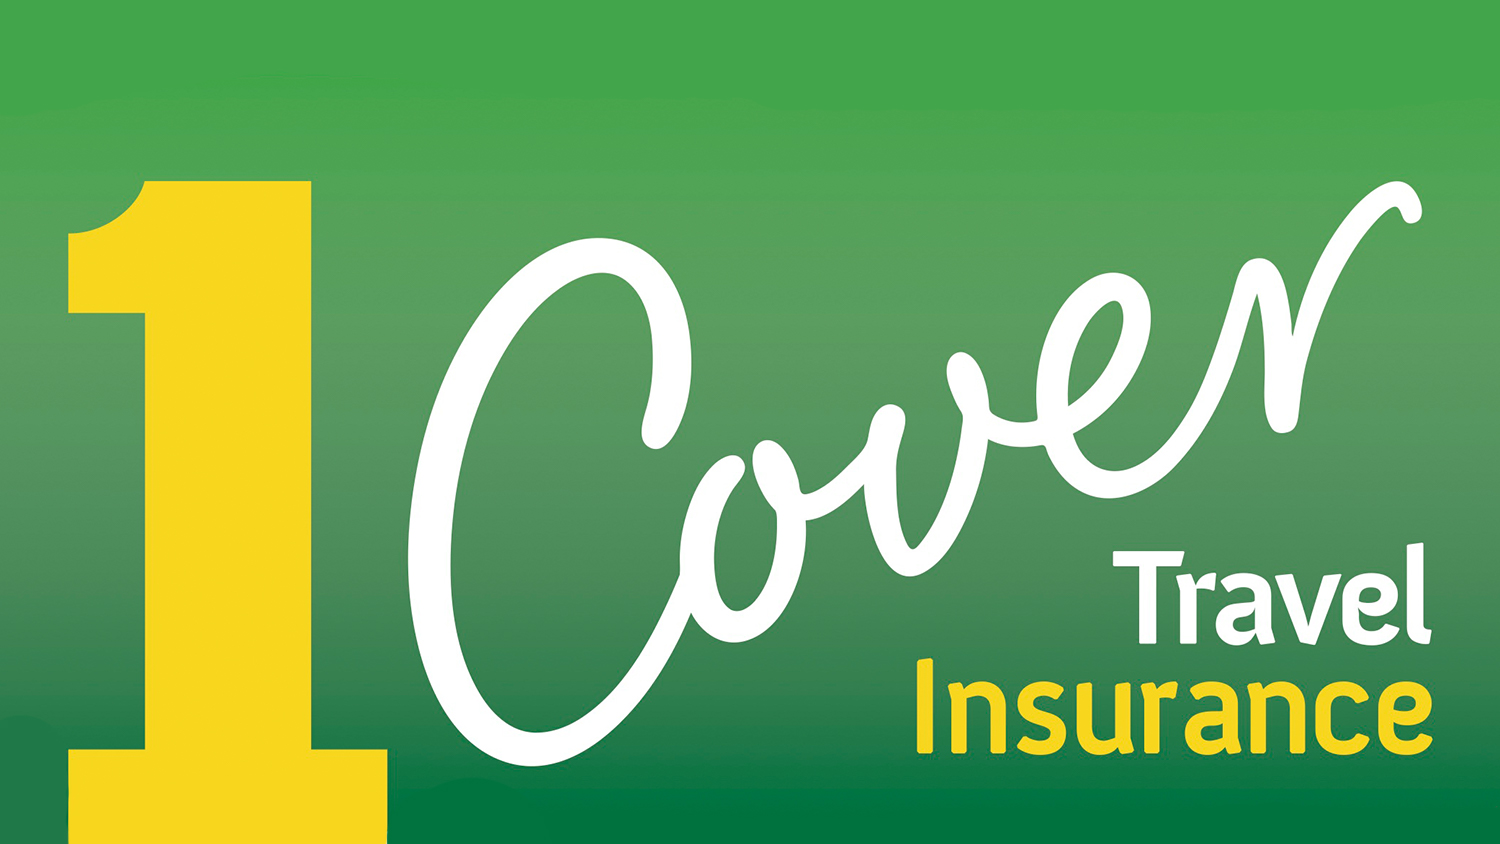 1cover cruise insurance